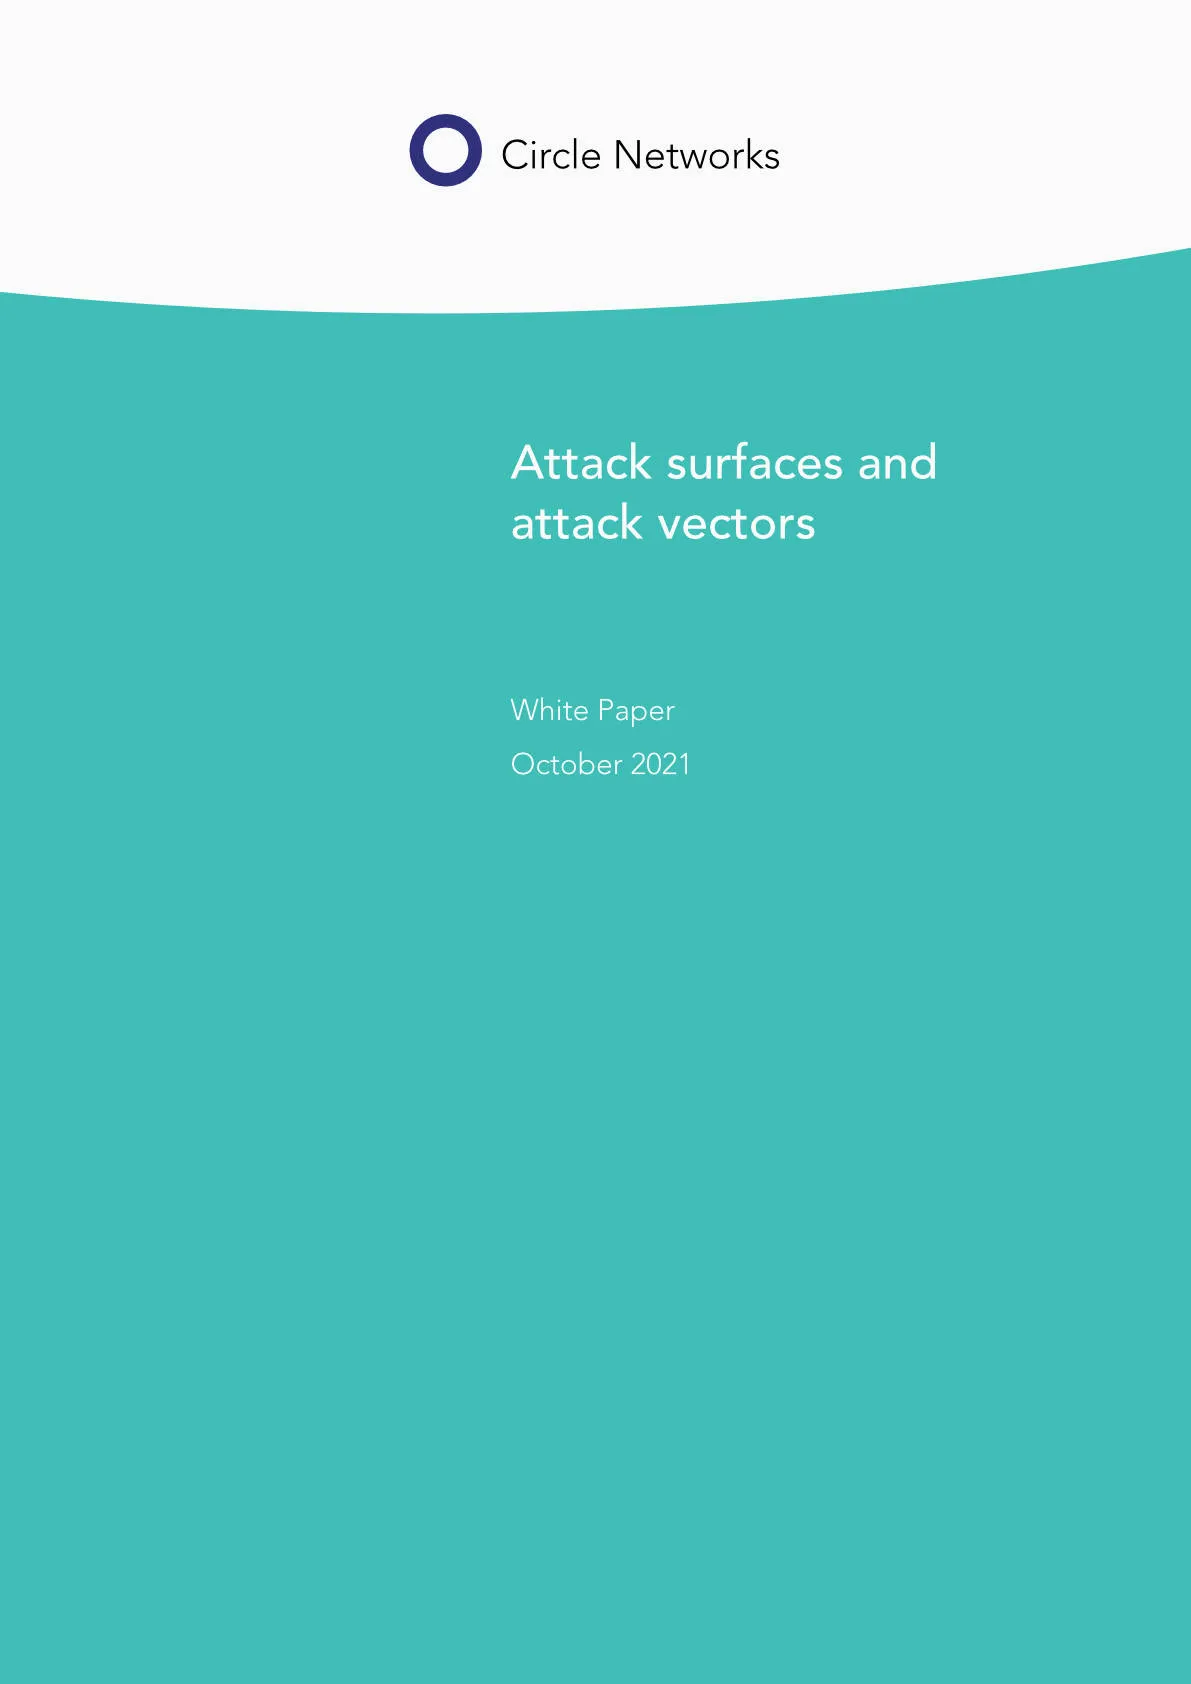 Attack surfaces and attack vectors